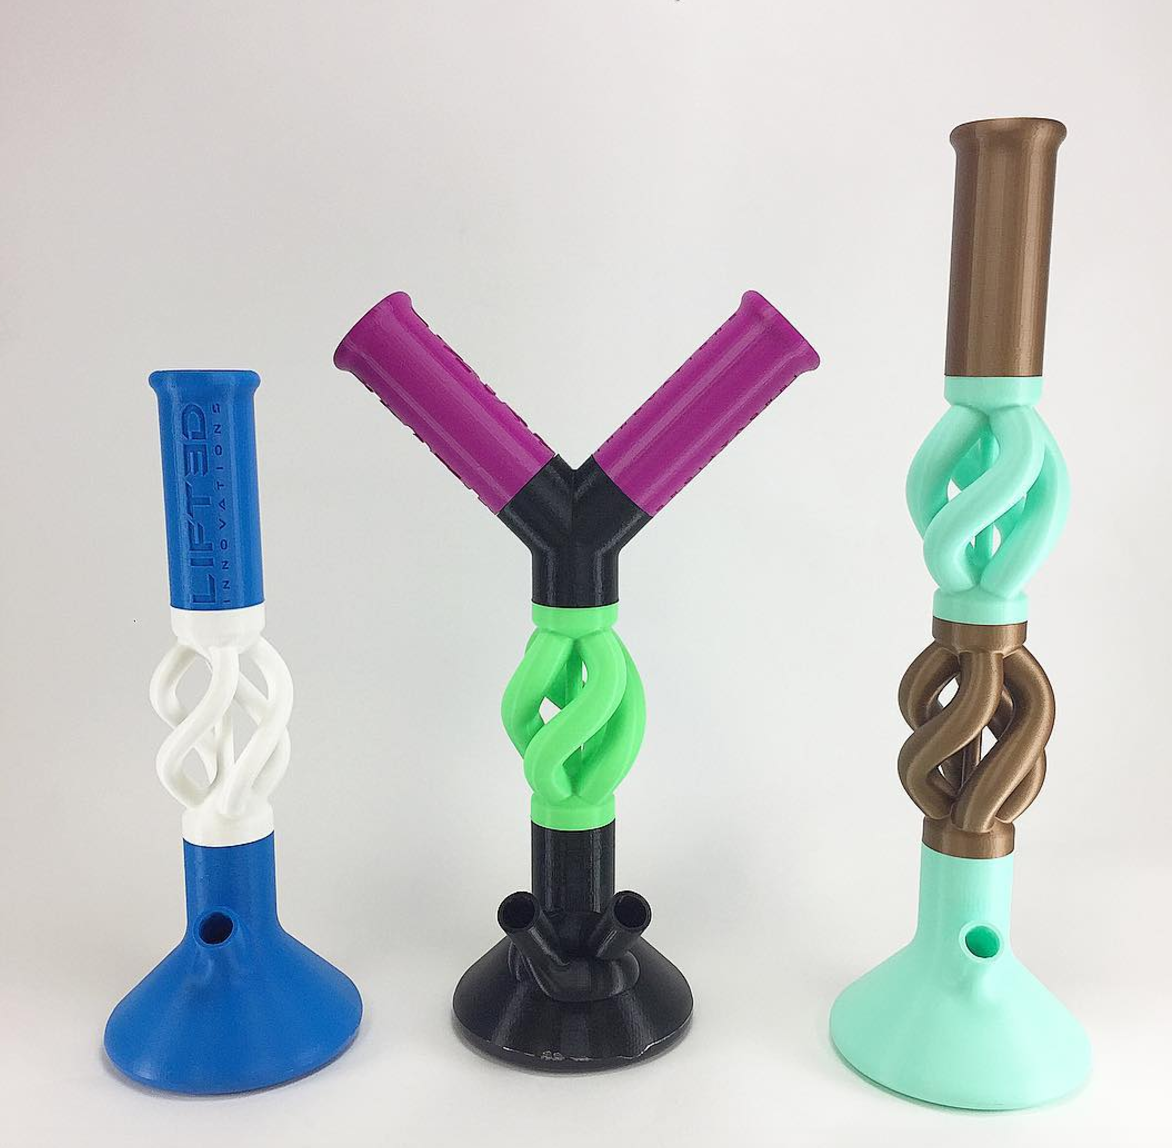 3-D Printed Bongs from Lifted Innovations